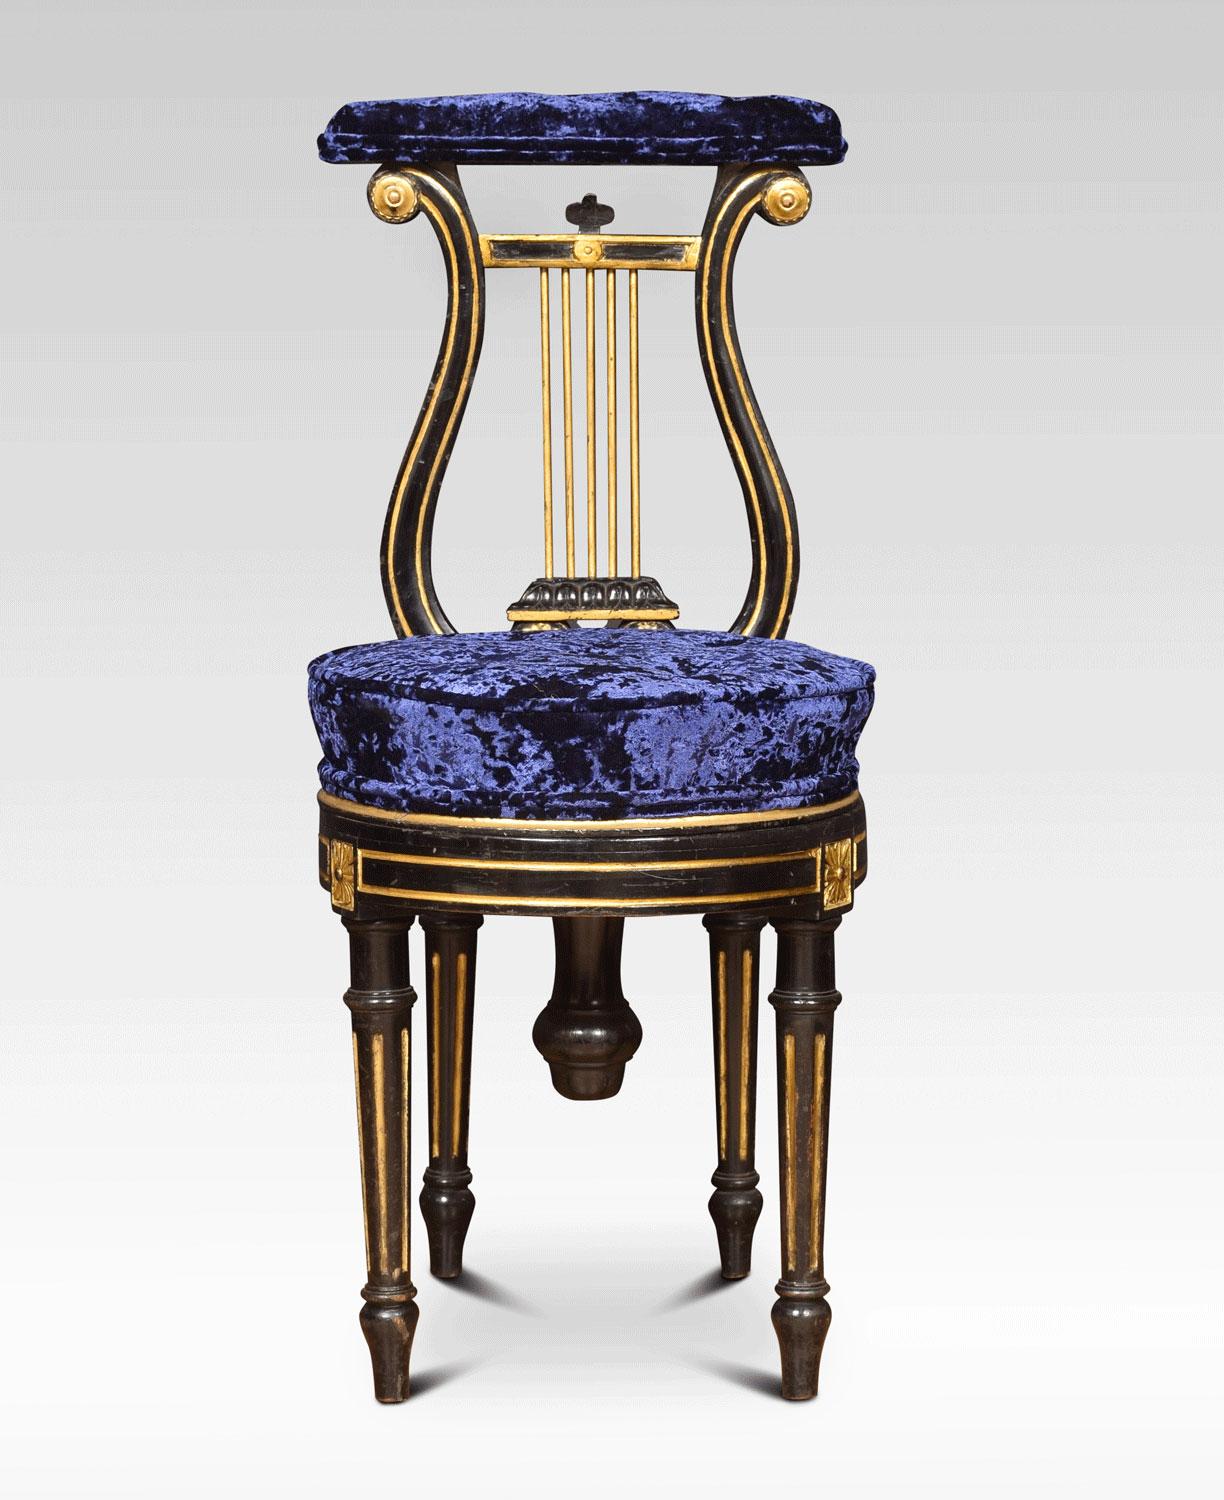 19th century music chair with buttoned upholstered top rail above ebonised and gilt lyre back. To the circular adjustable swivel seat, all raised up on tapered reeded supports.
Dimensions:
Height 34.5 inches height to seat 20 inches adjustable to